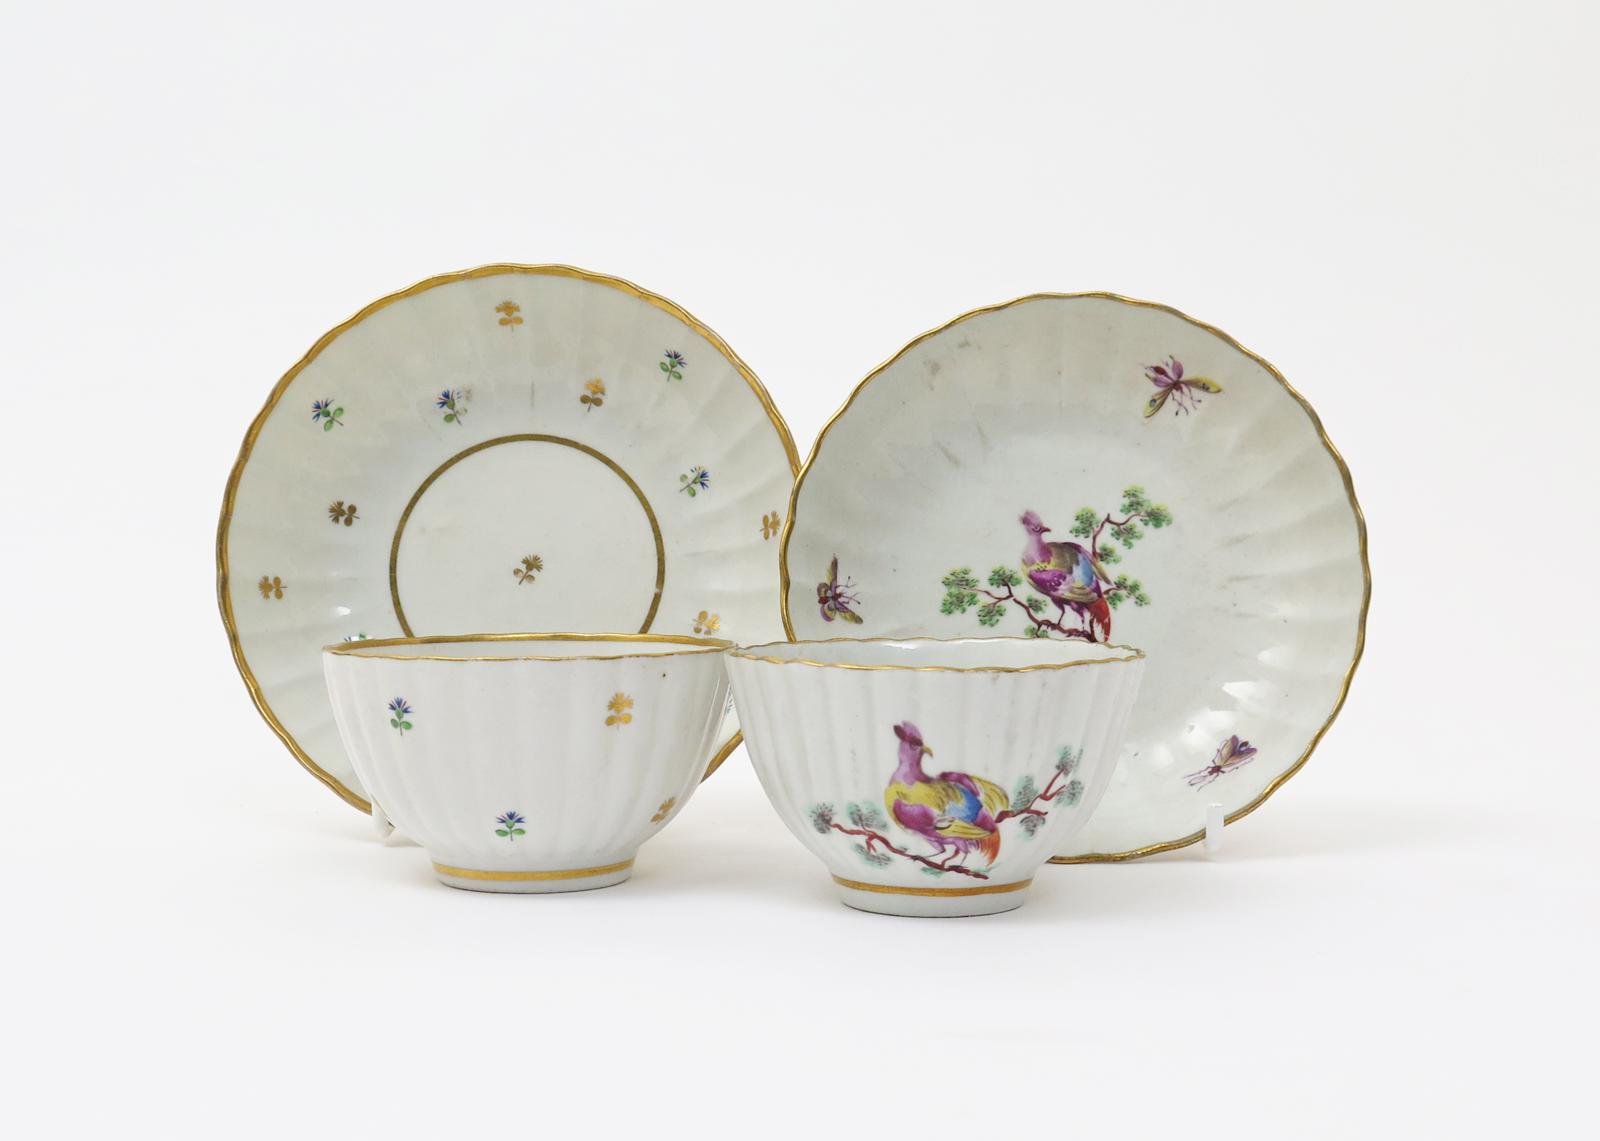 Two fluted teabowls and saucers  c.1765-75, one painted with an exotic bird perched in leafy